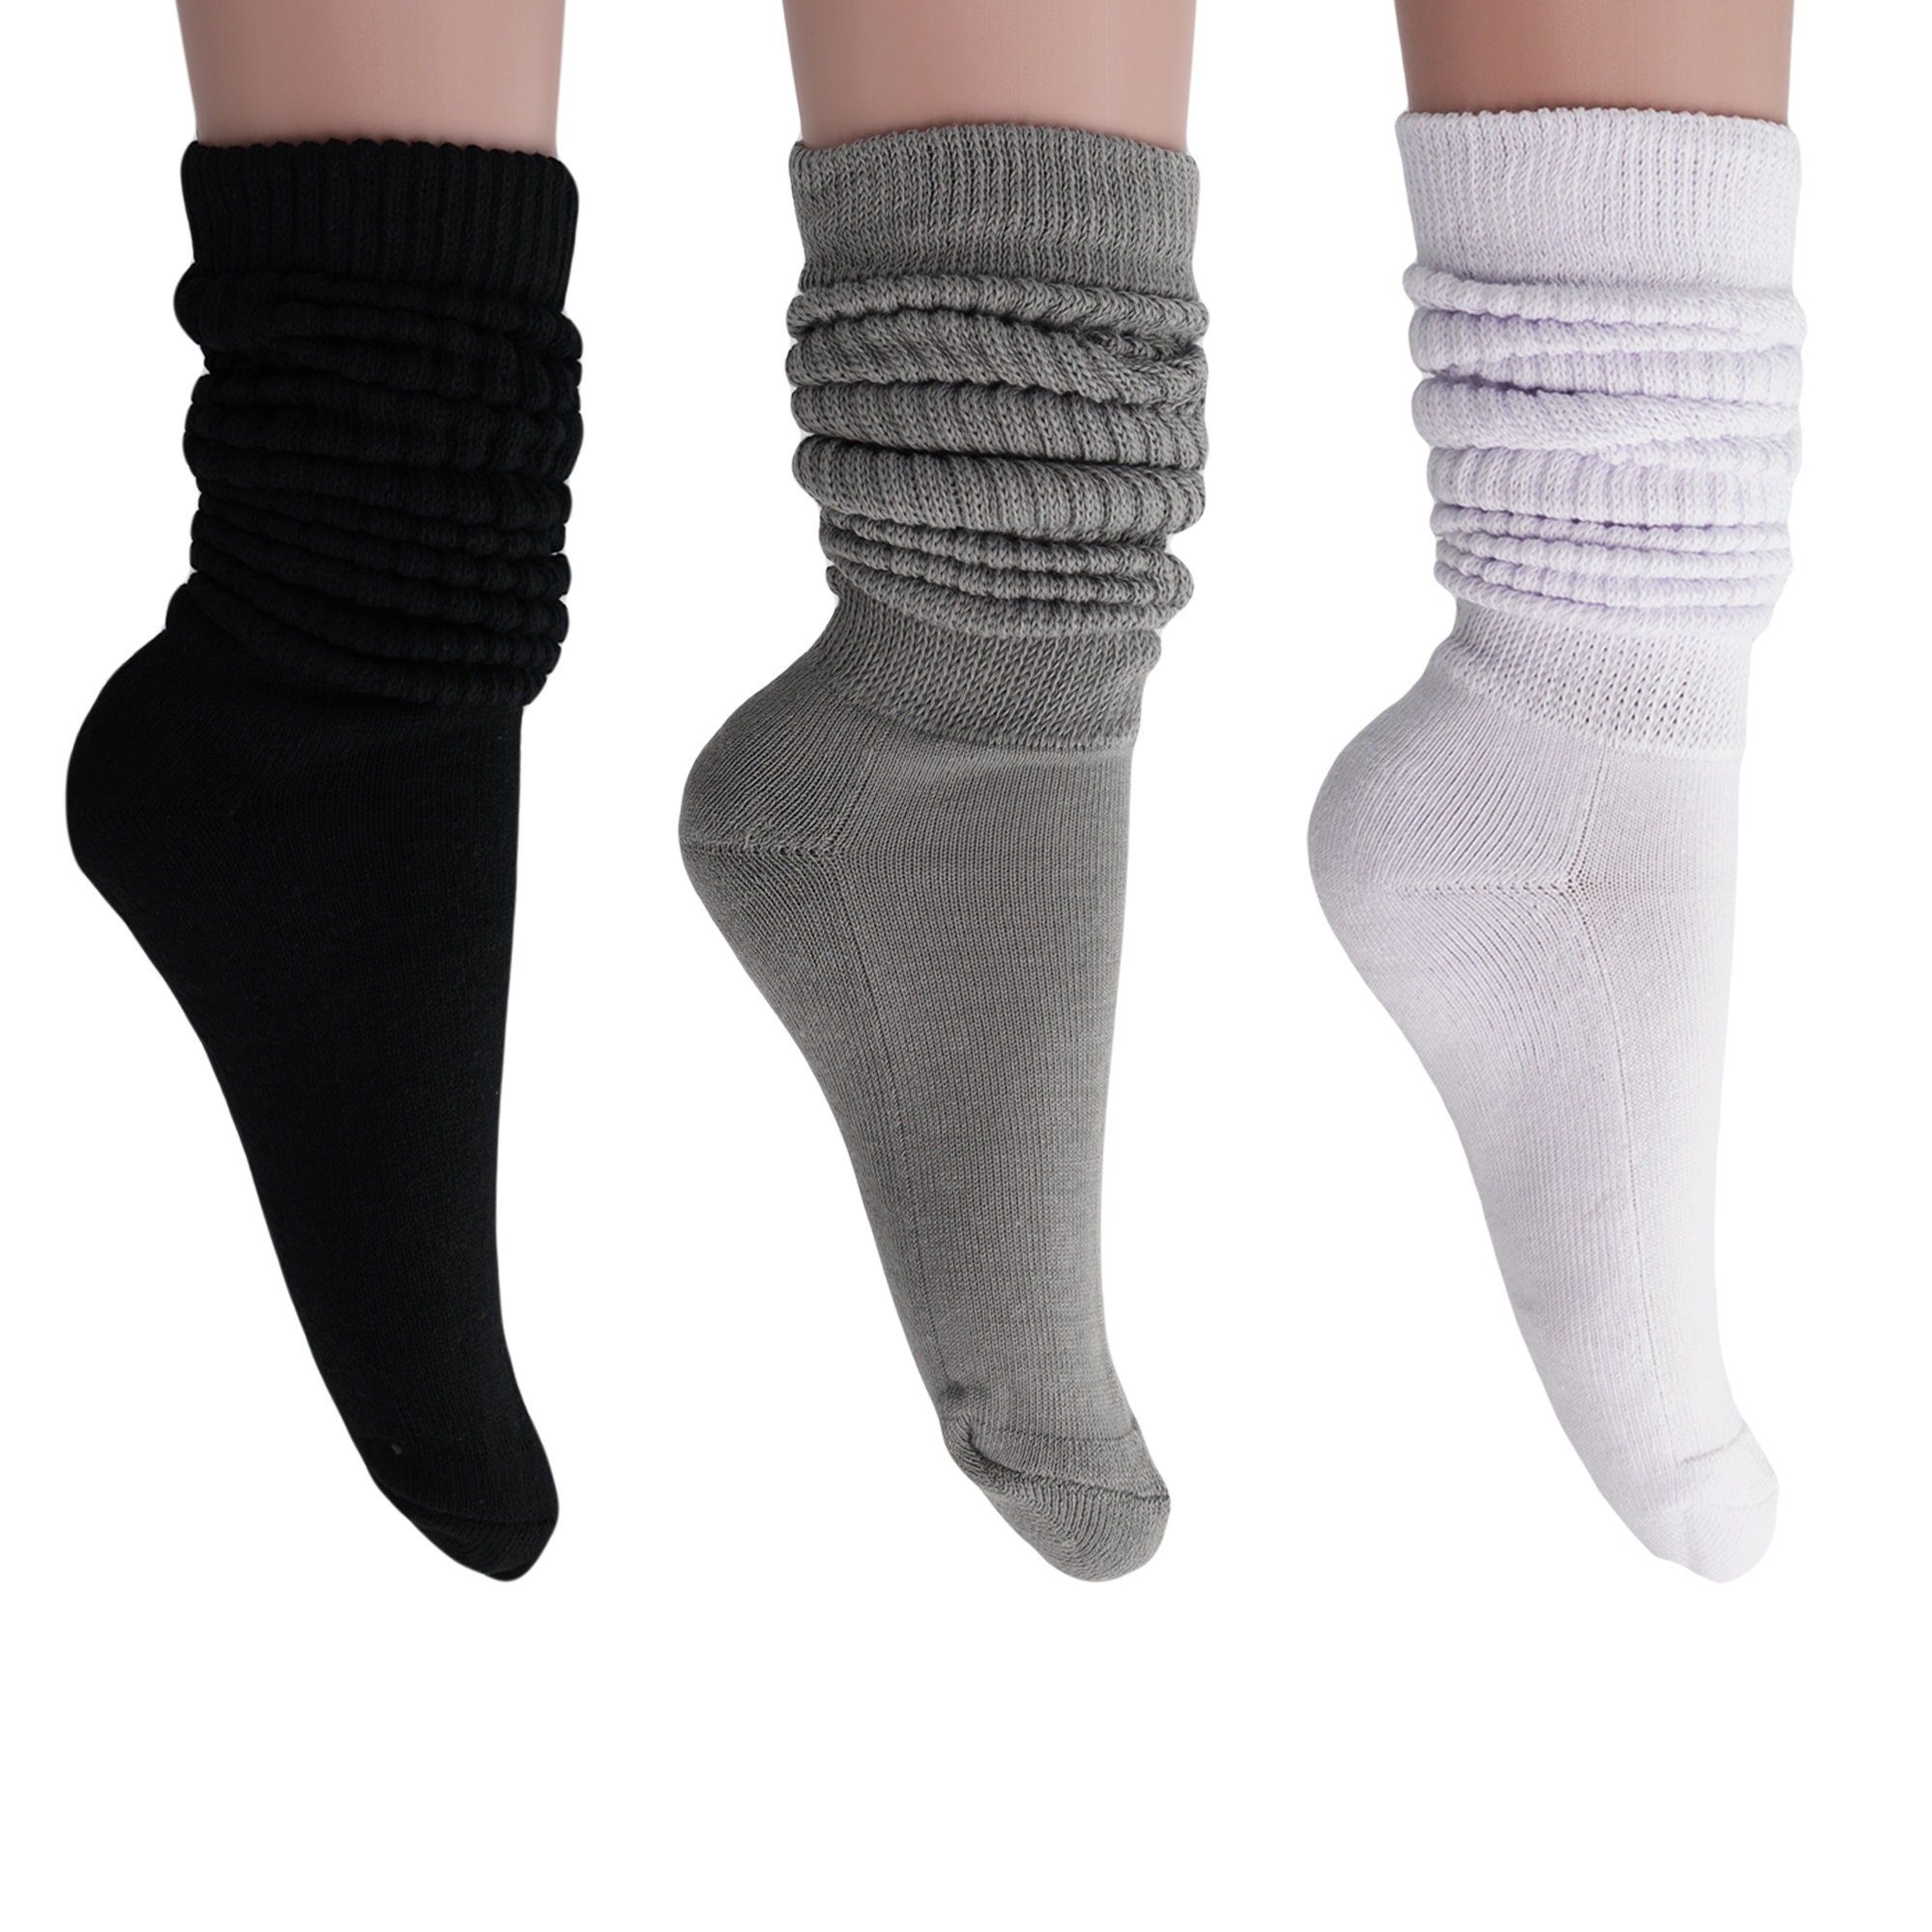 Slouch Socks for Women Long and Heavy Size 9-11 3 PAIRS -  Norway